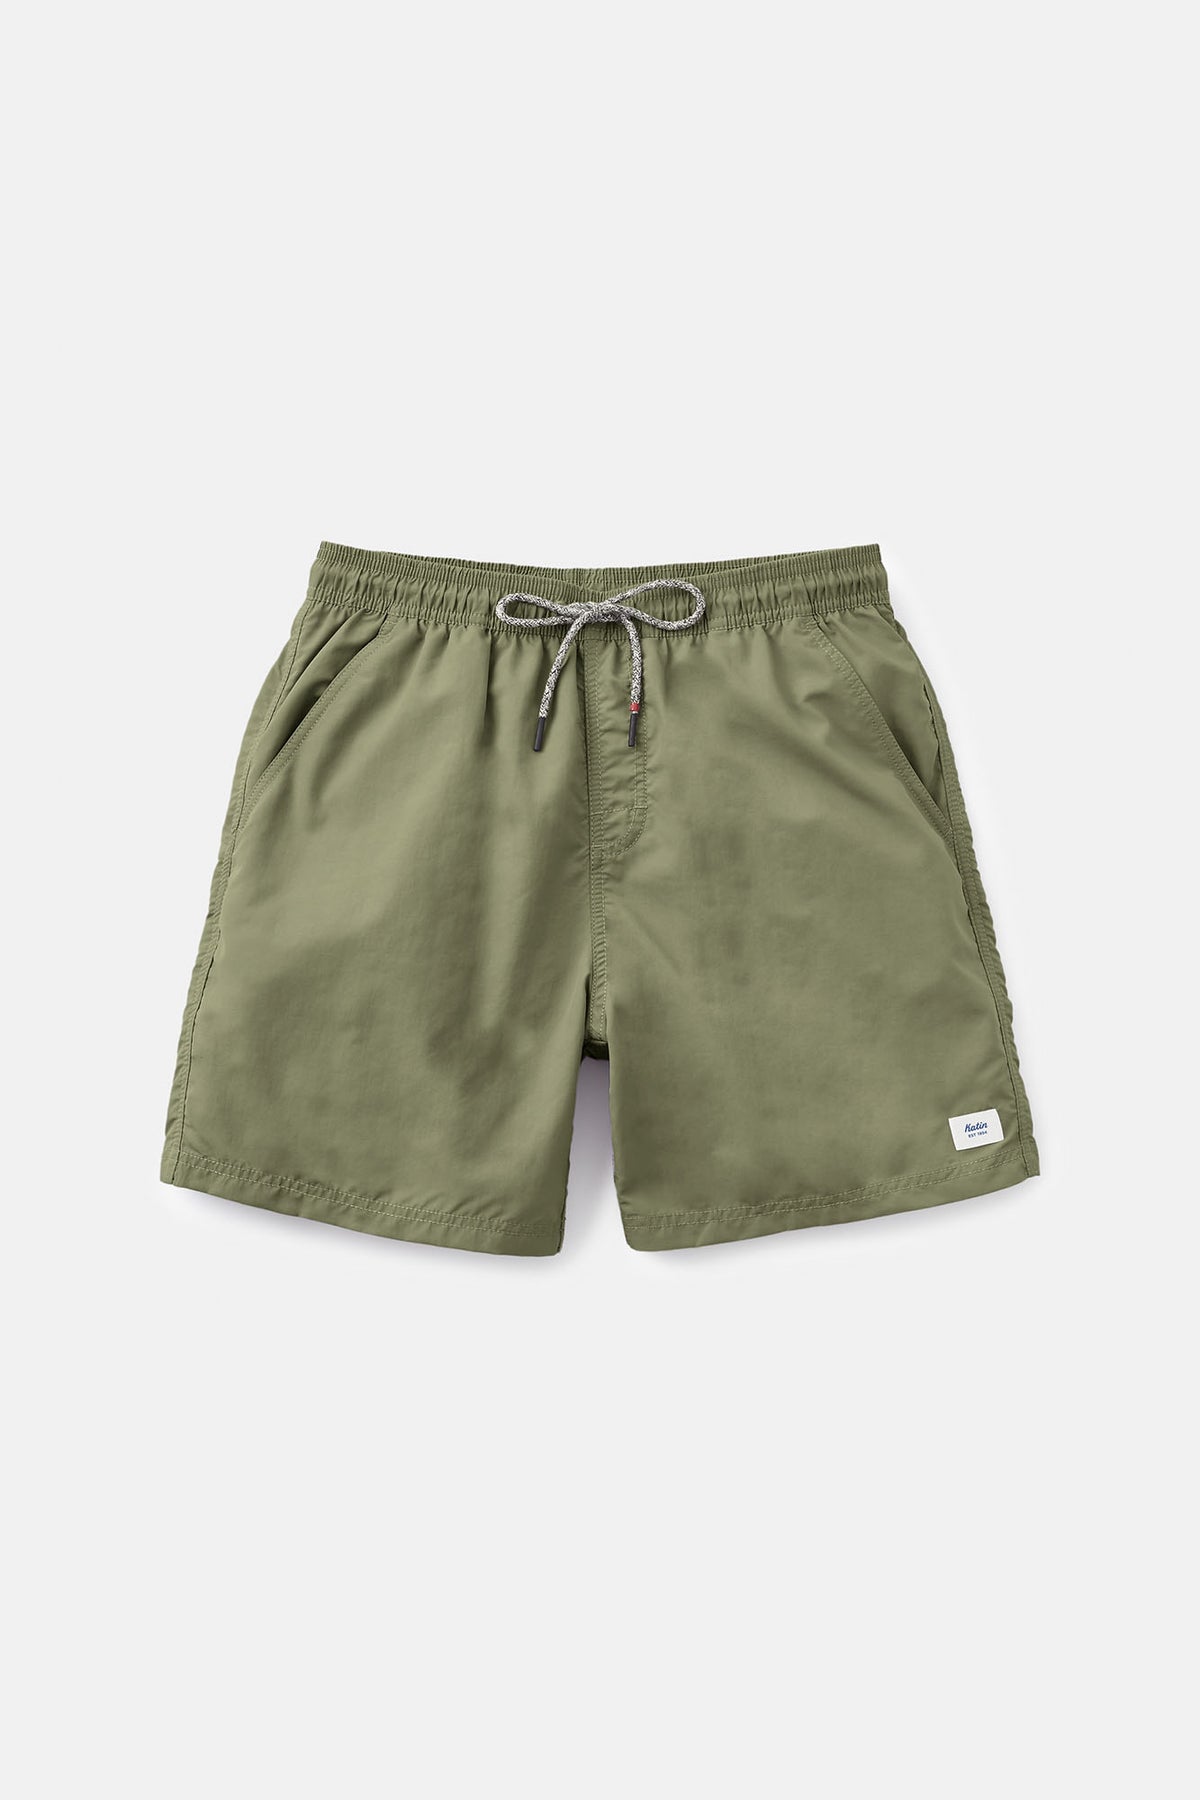 POOLSIDE VOLLEY TRUNK - OLIVE – CoastalEdge2120